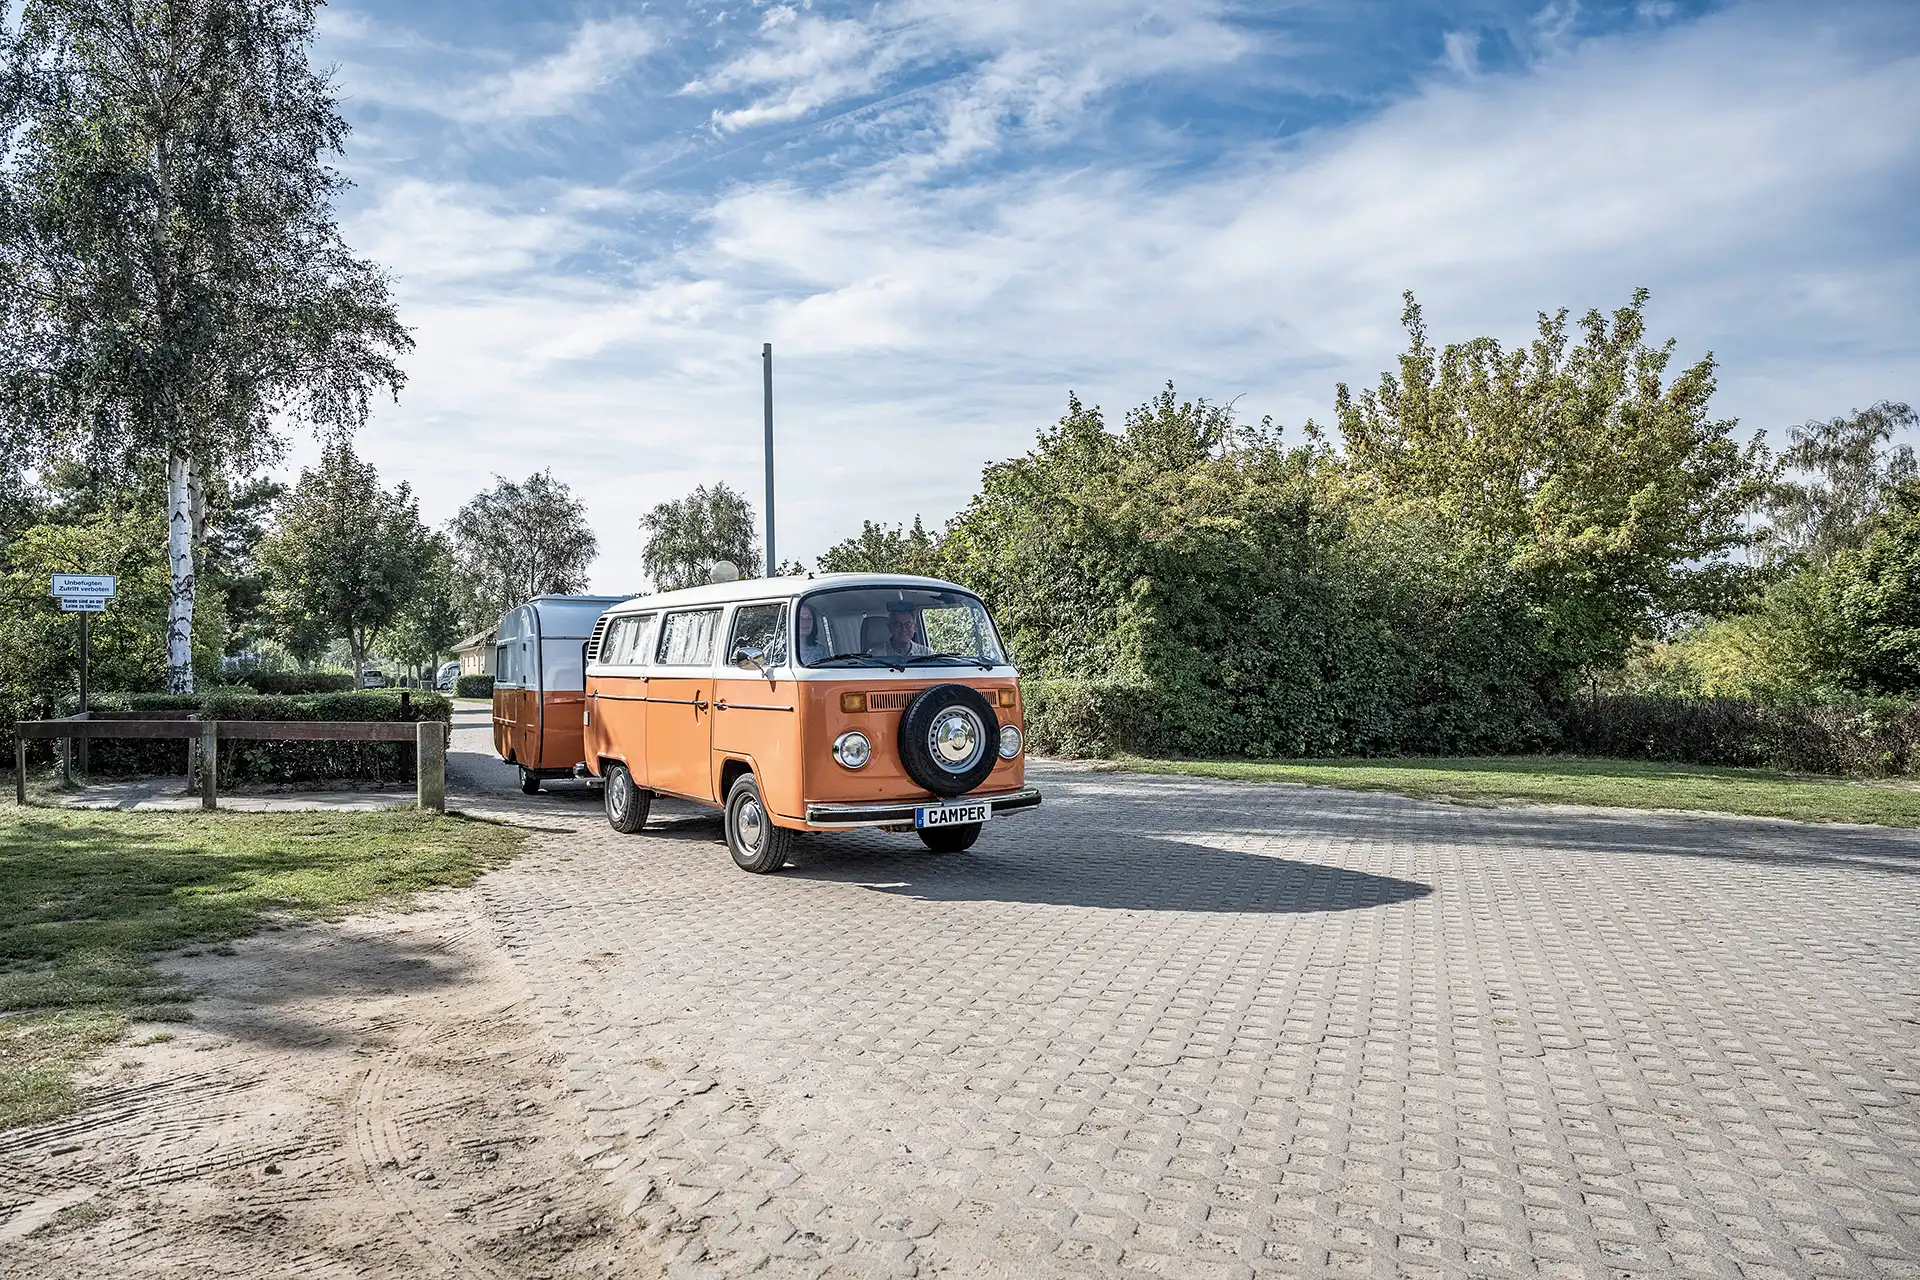 Campers leaving the Stranddörp campsite with their van